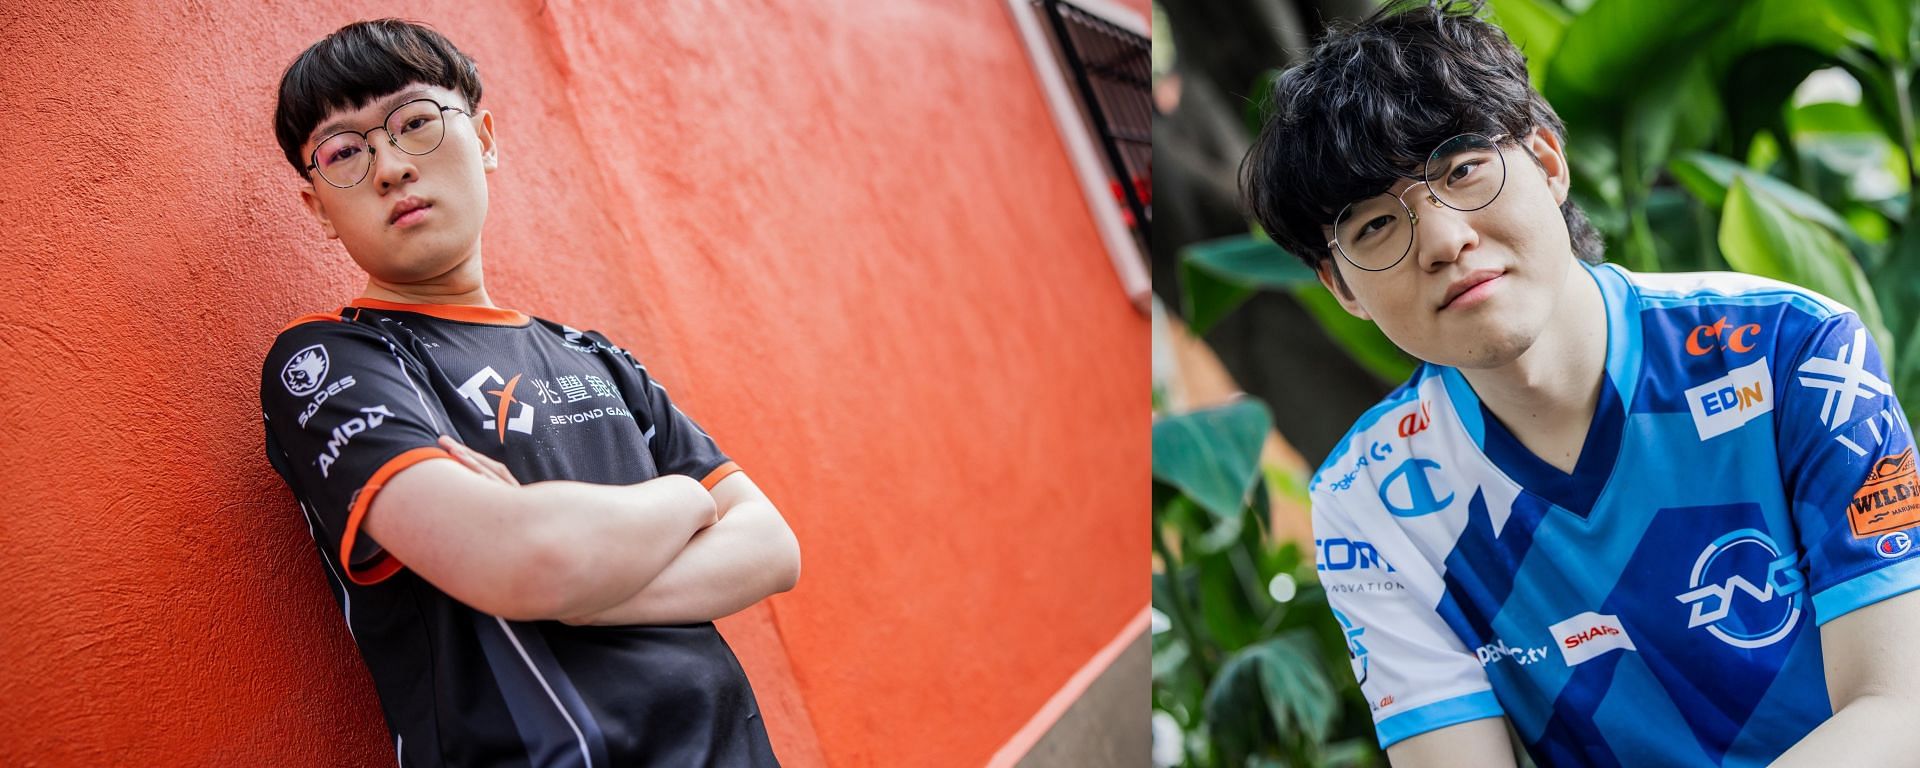 Wako and Yaharong will be the key players for their teams when Beyond Gaming and DetonatioN FocusMe meet at Worlds 2022 (Image via Riot Games)